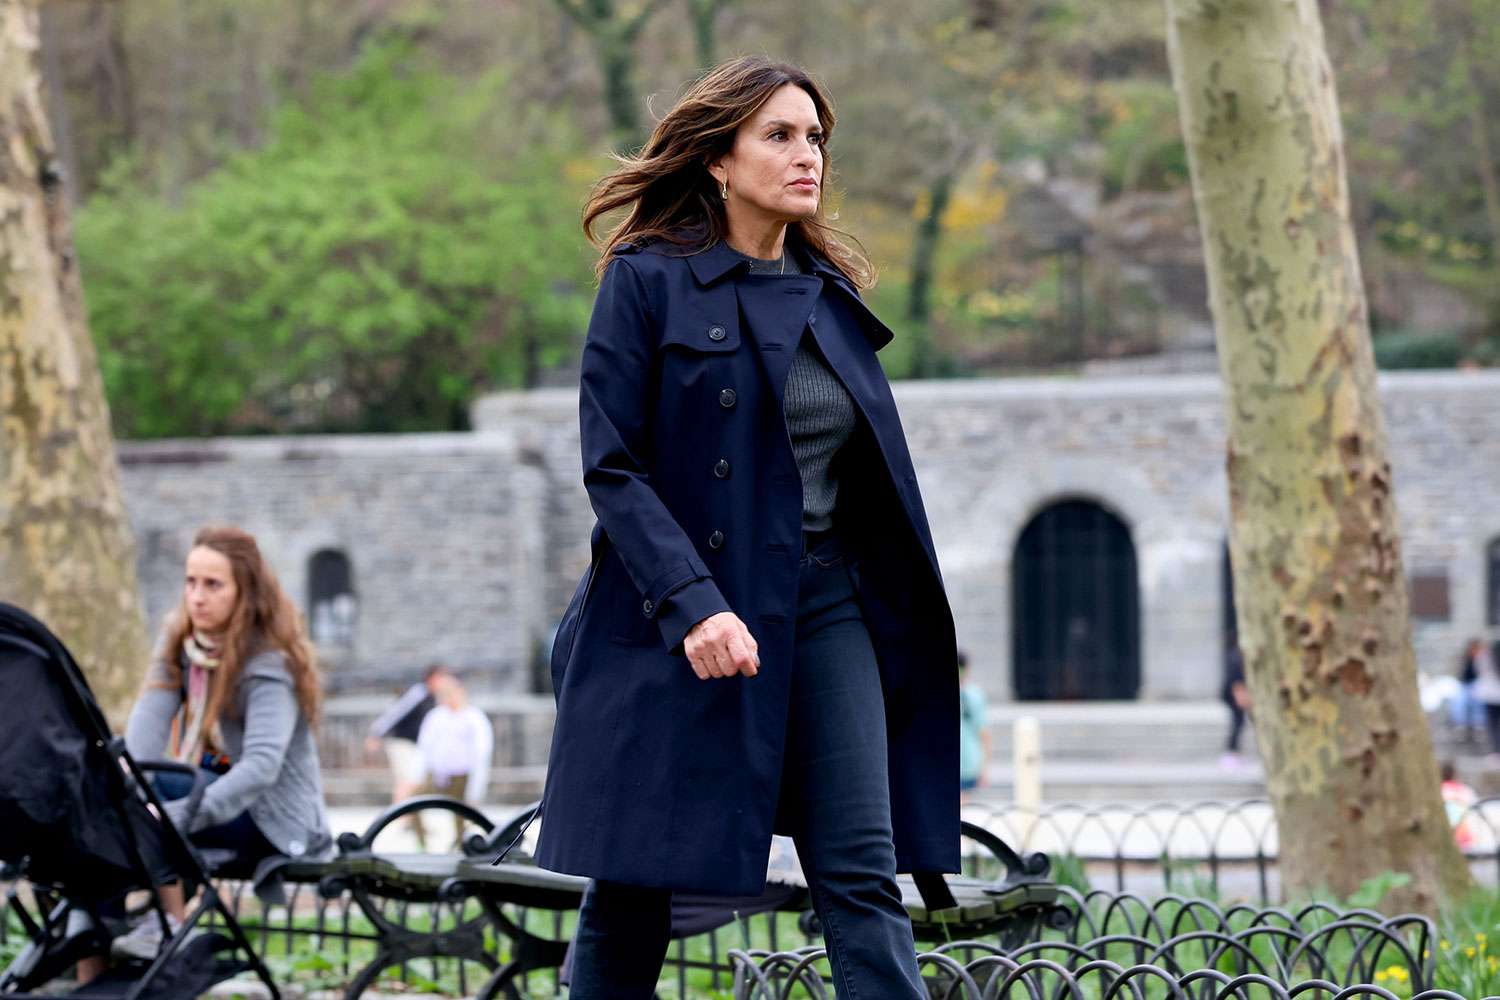 Mariska Hargitay discusses her real-life 'SVU' moment helping young girl: 'We were meant to connect'